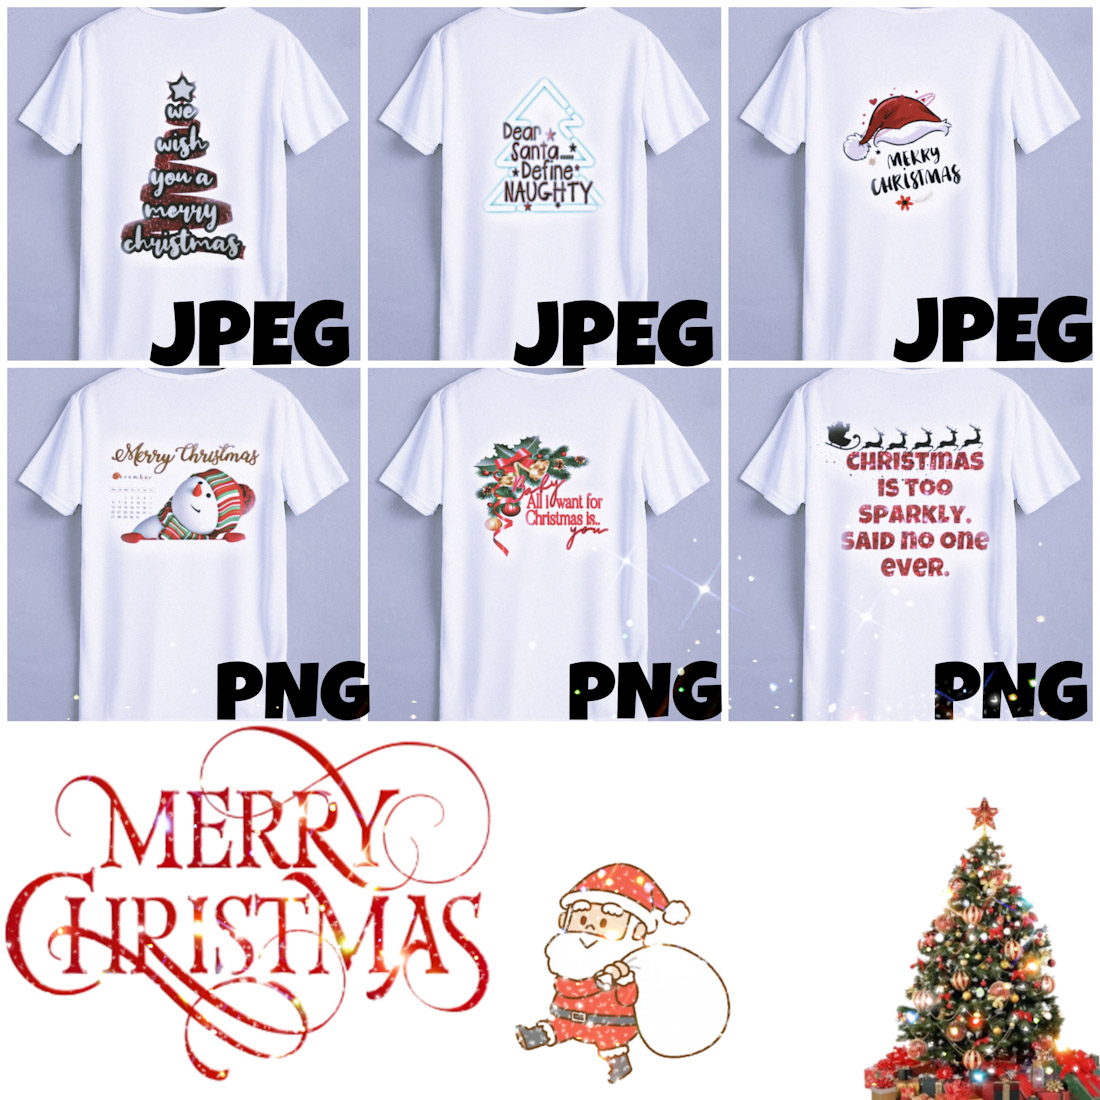 6 Christmas T-shirt Designs created by Fiza touch.